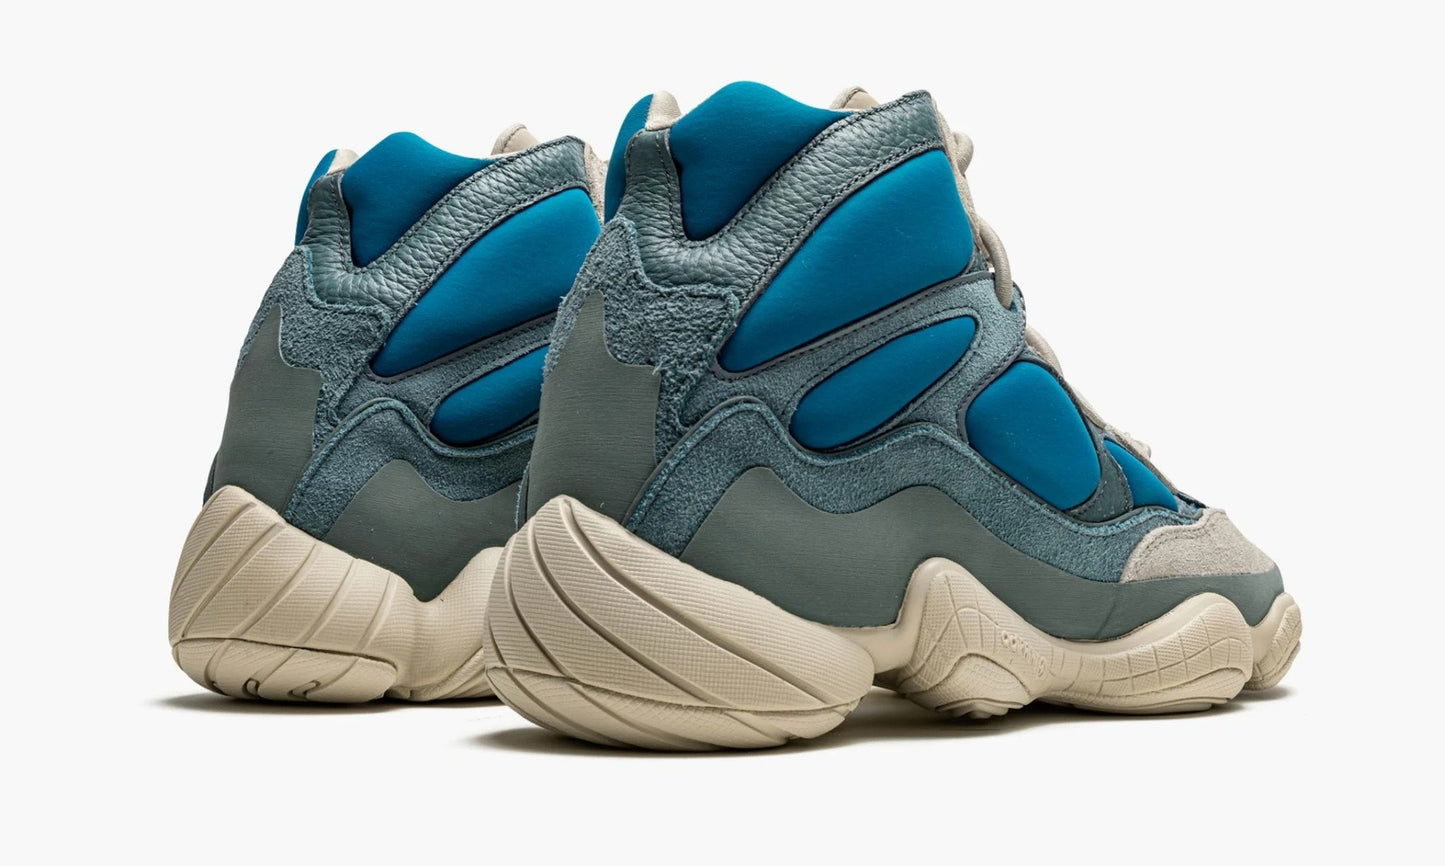 Yeezy 500 High "Frosted Blue" - GZ5544 | Grailshop